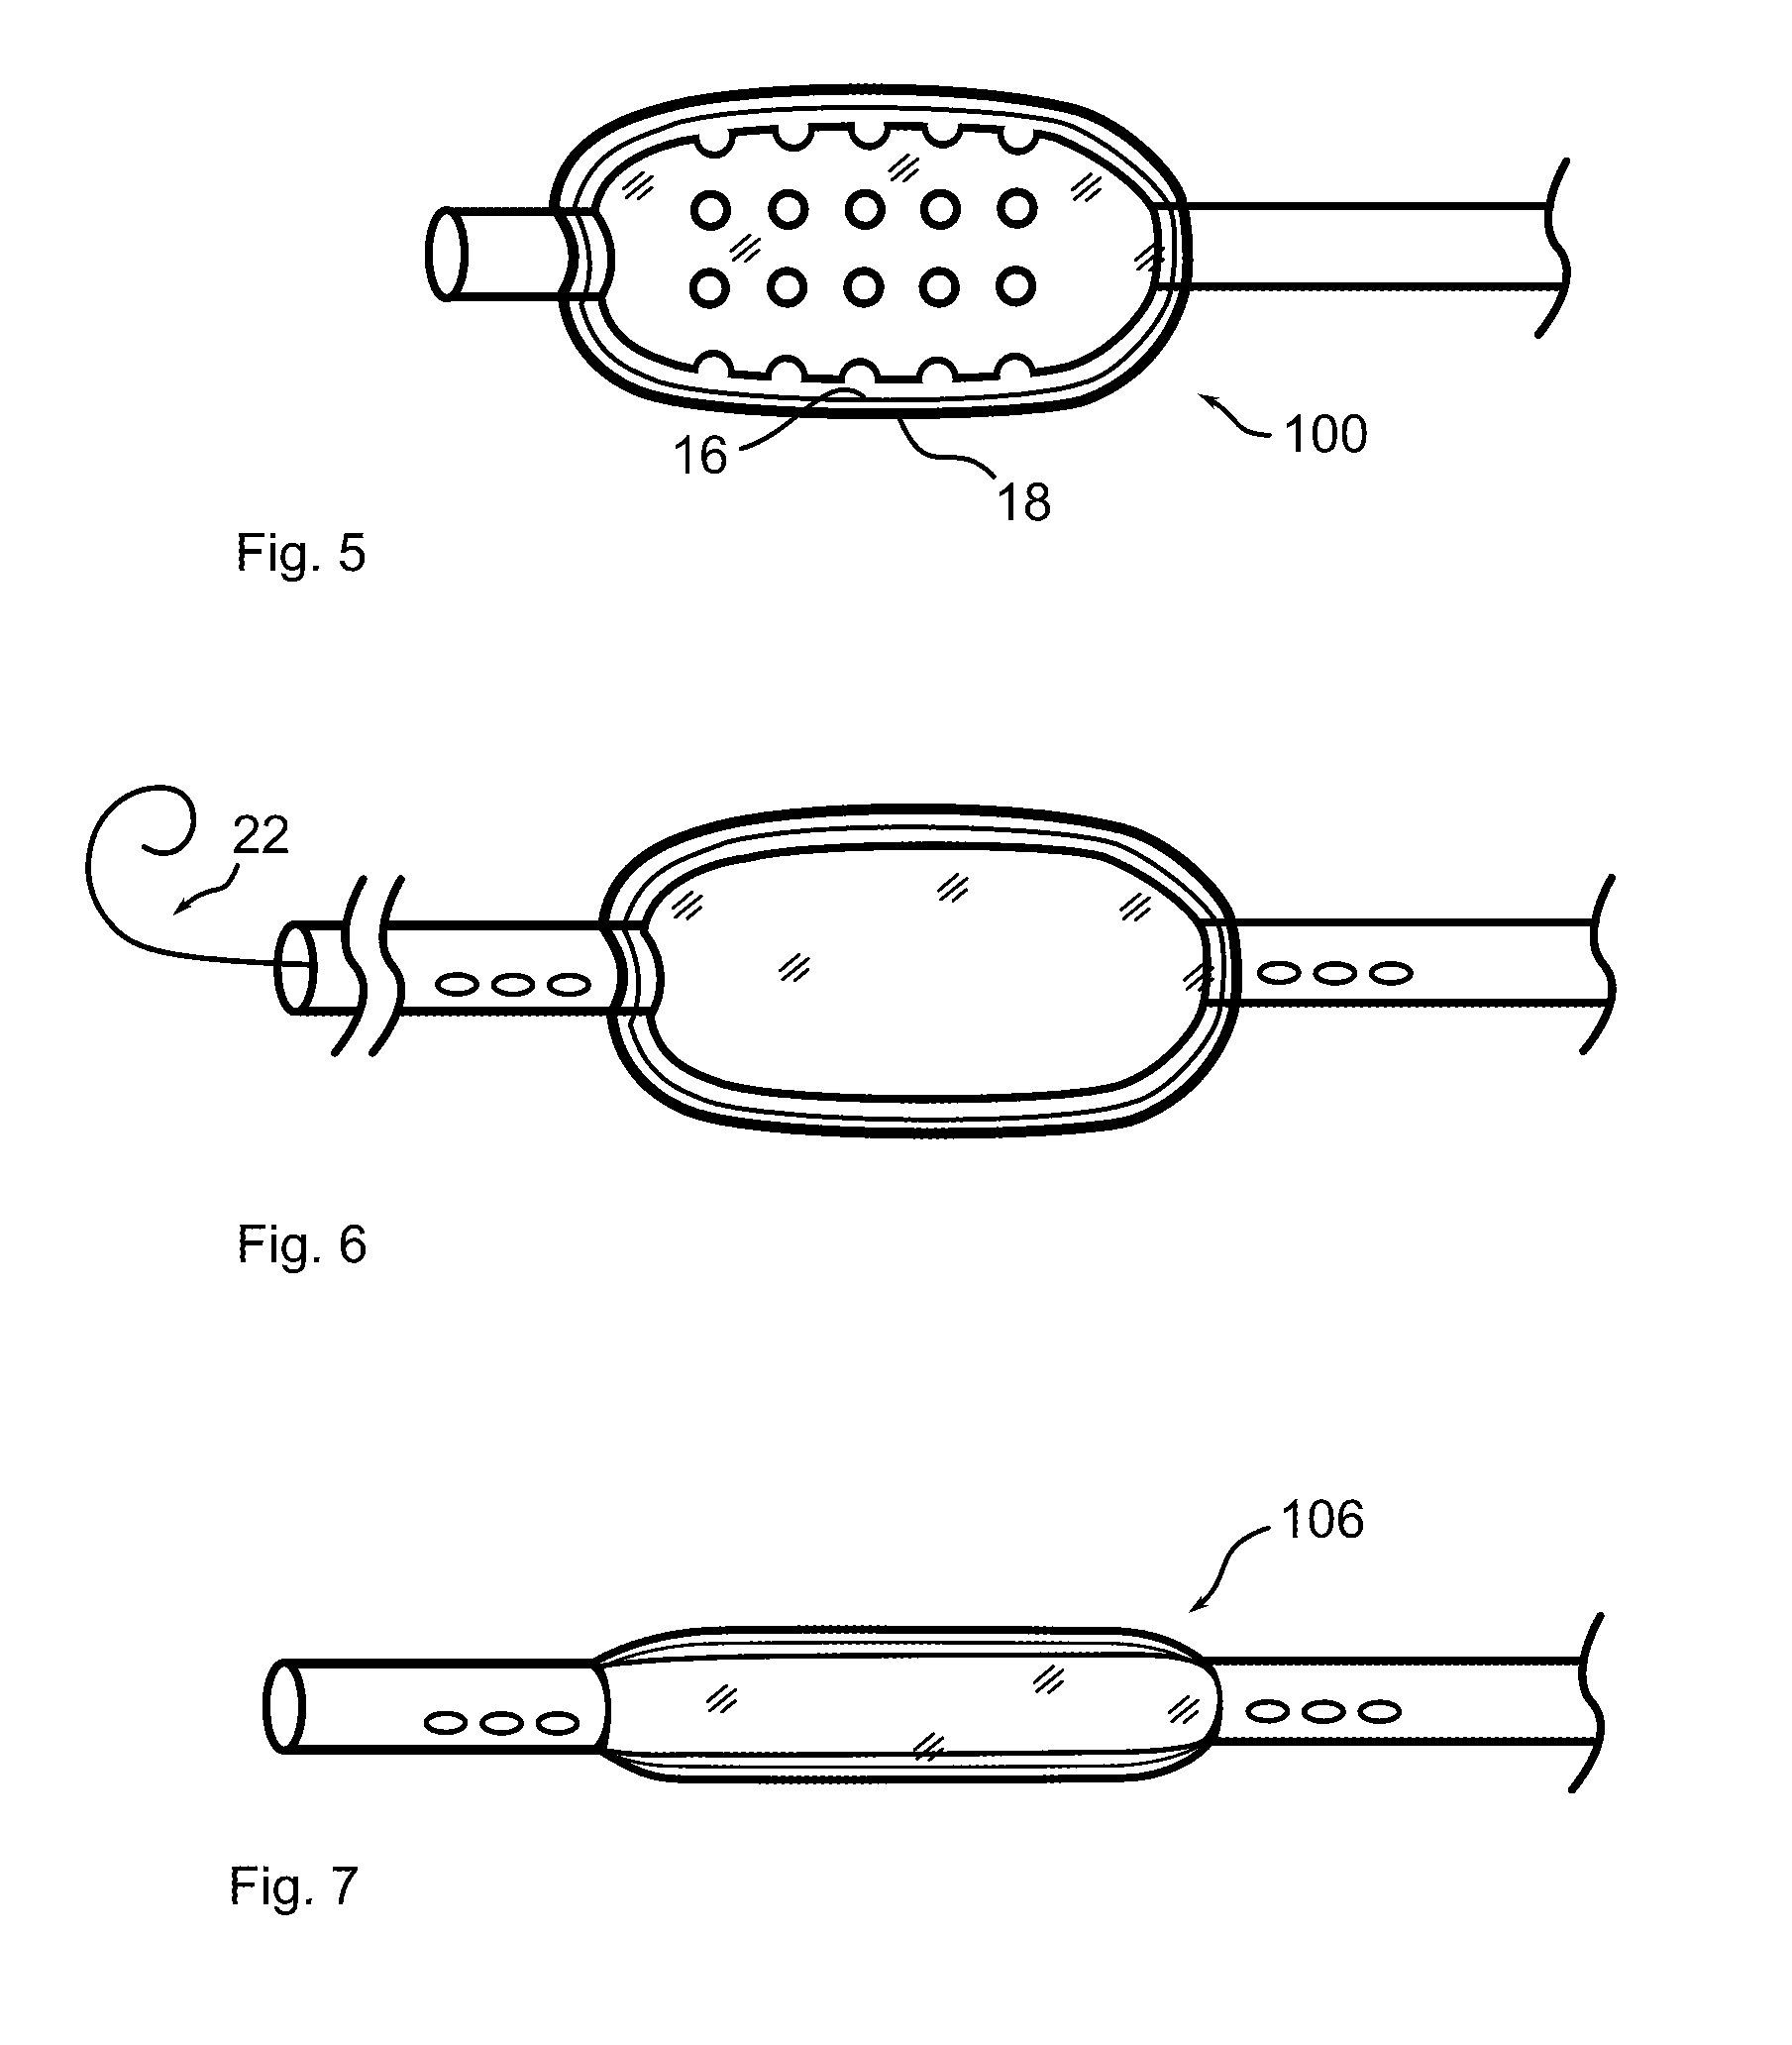 Delivery of therapeutic and marking substance through intra lumen expansion of a delivery device